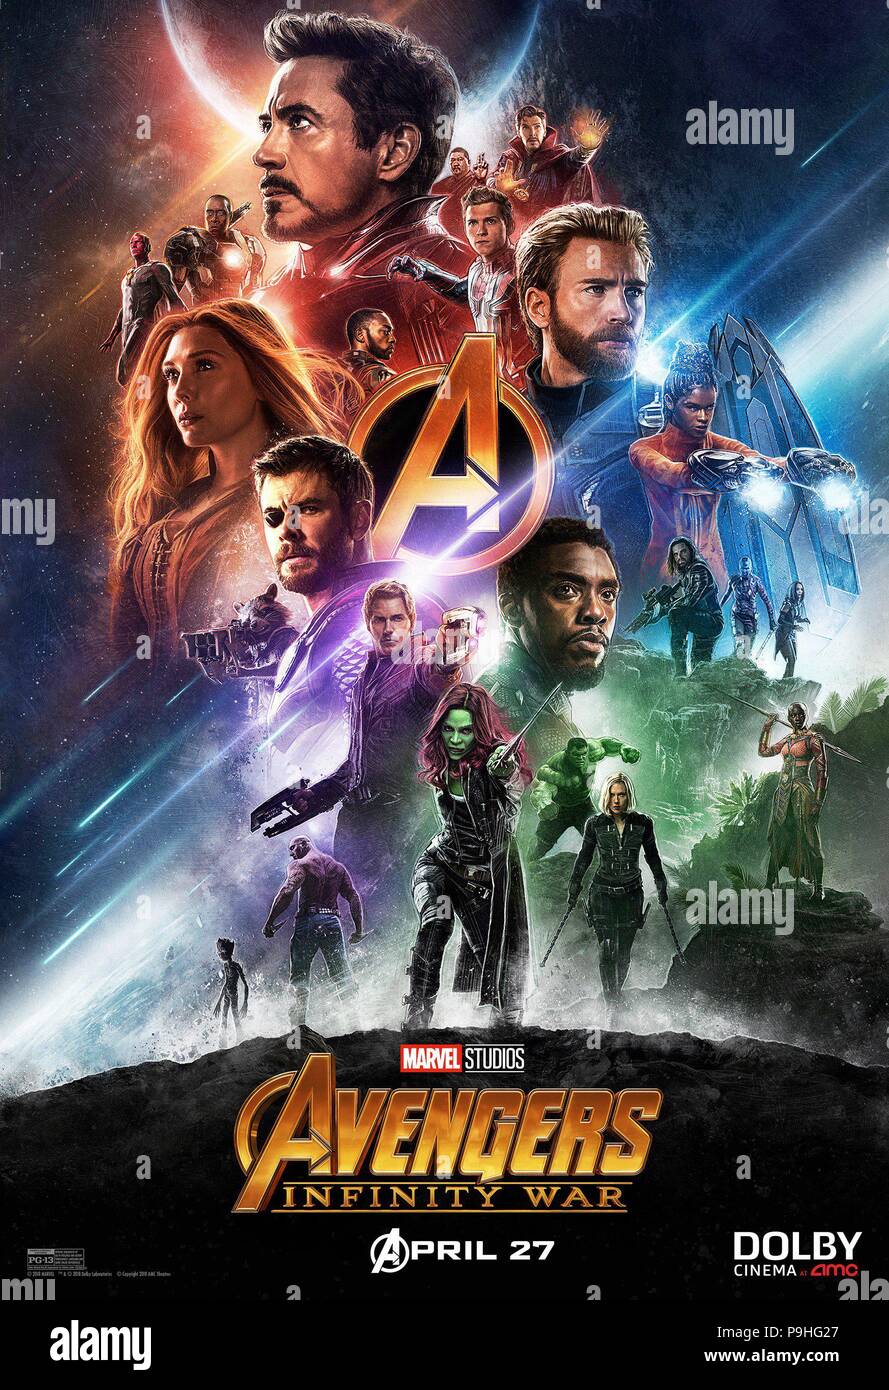 RELEASE DATE: May 4, 2018 TITLE: Avengers: Infinity War STUDIO: Marvel Studios DIRECTOR: Anthony Russo, Joe Russo PLOT: The Avengers and their allies must be willing to sacrifice all in an attempt to defeat the powerful Thanos before his blitz of devastation and ruin puts an end to the universe. STARRING: Poster Art (Credit Image: © Marvel Studios/Entertainment Pictures) Stock Photo